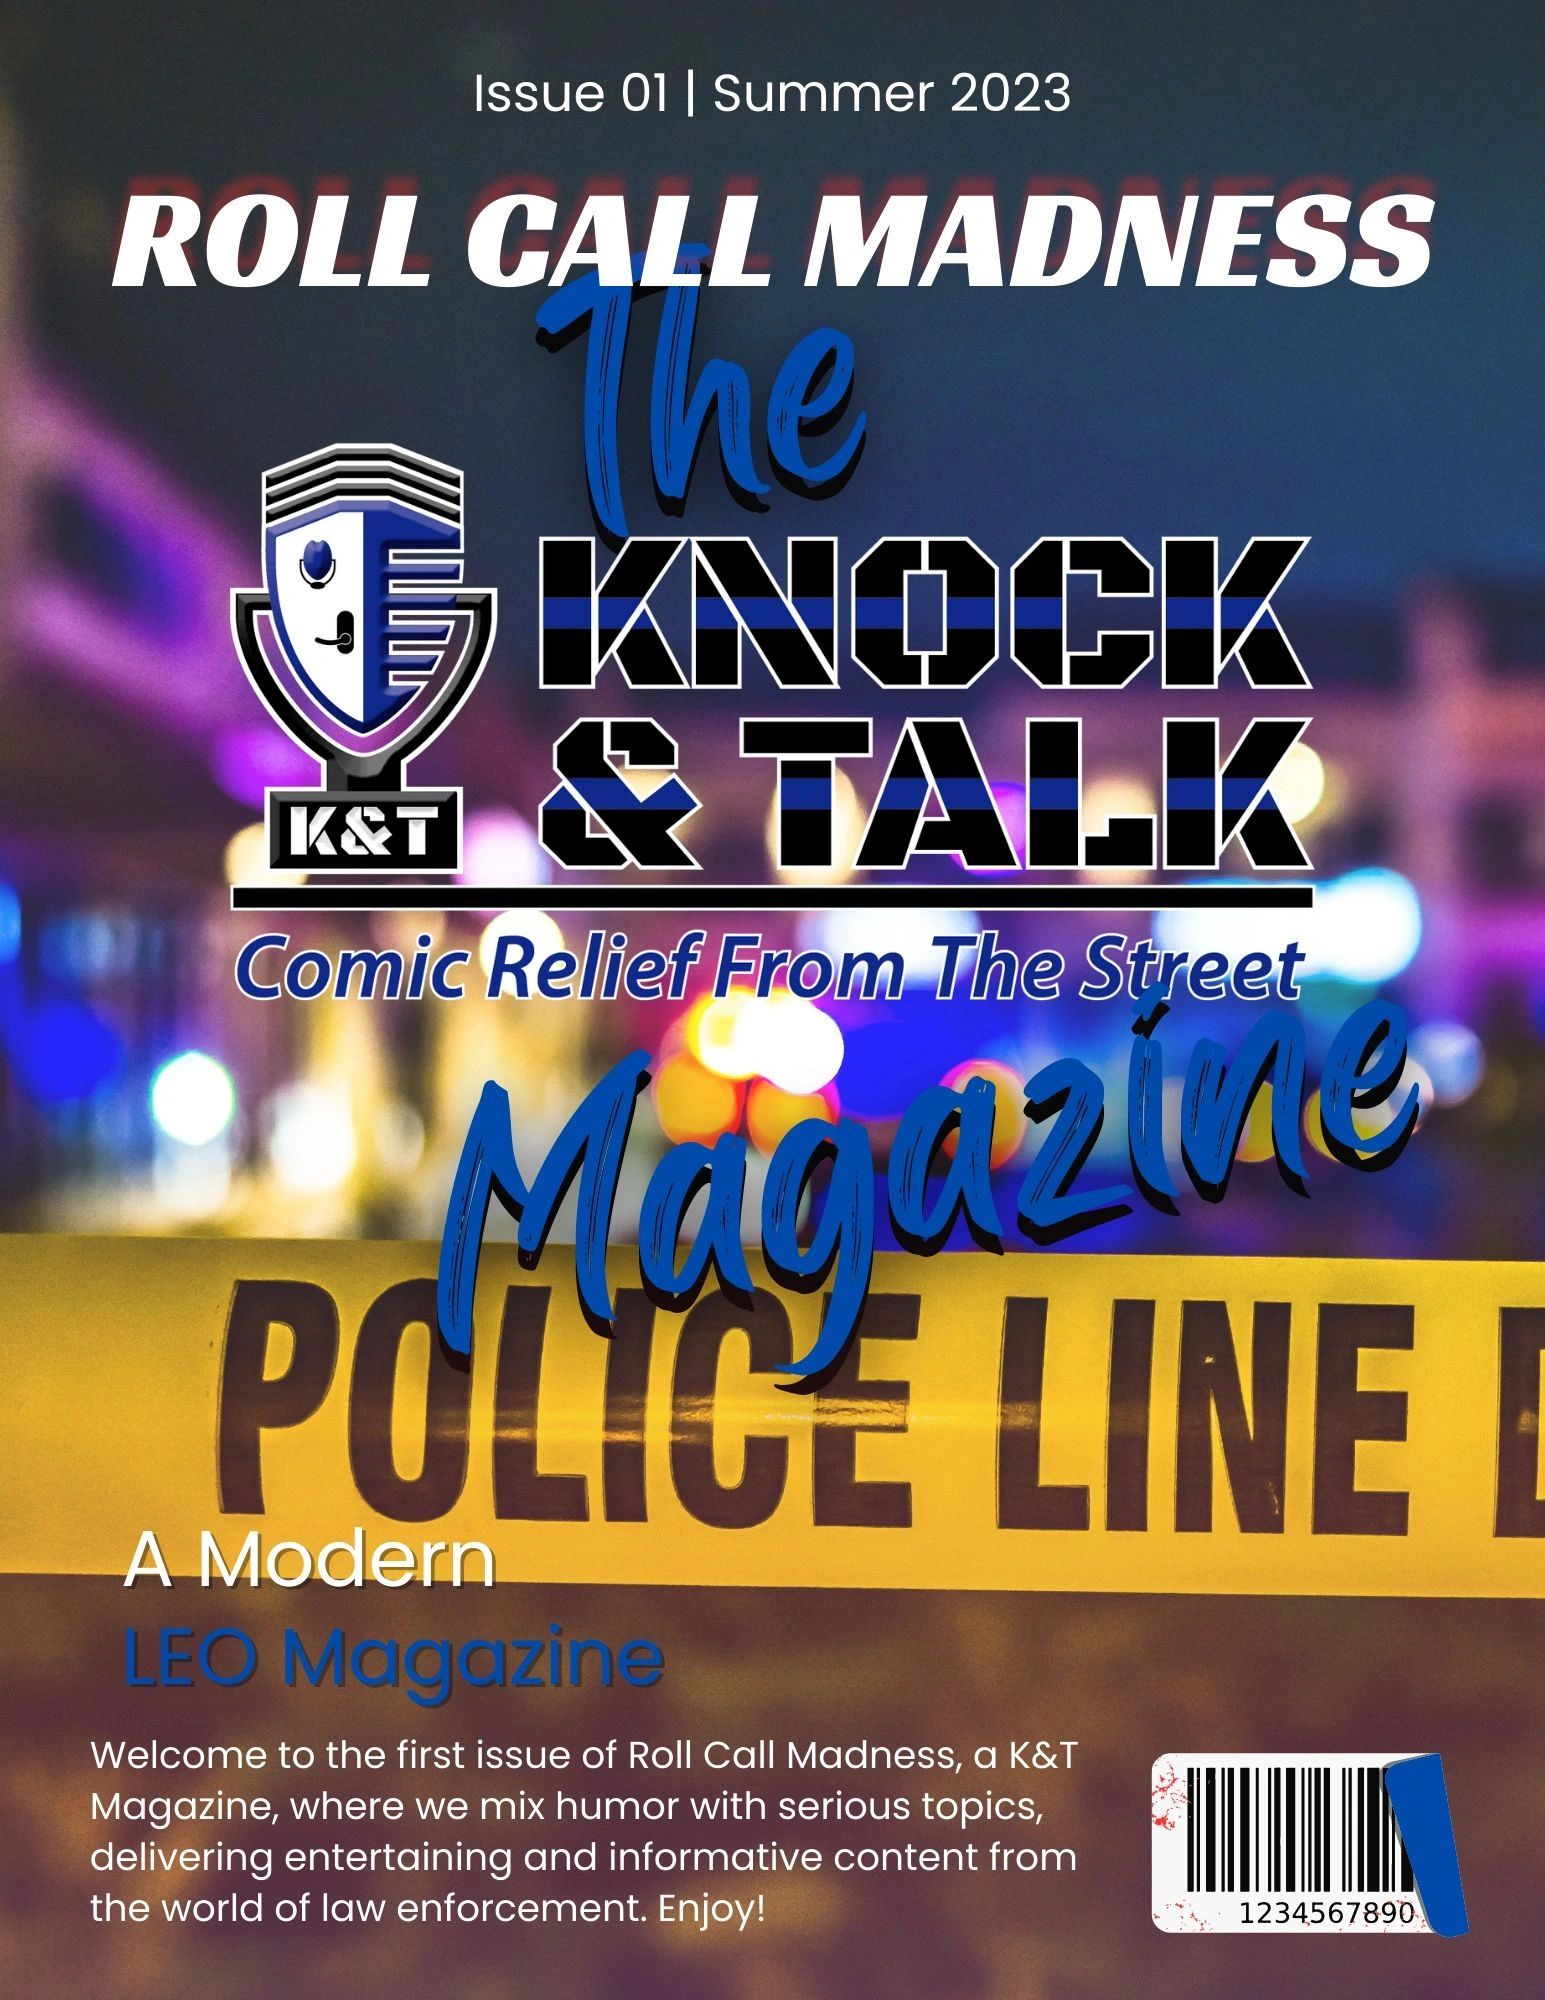 The Knock and Talk Show's Magazine: Roll Call Madness